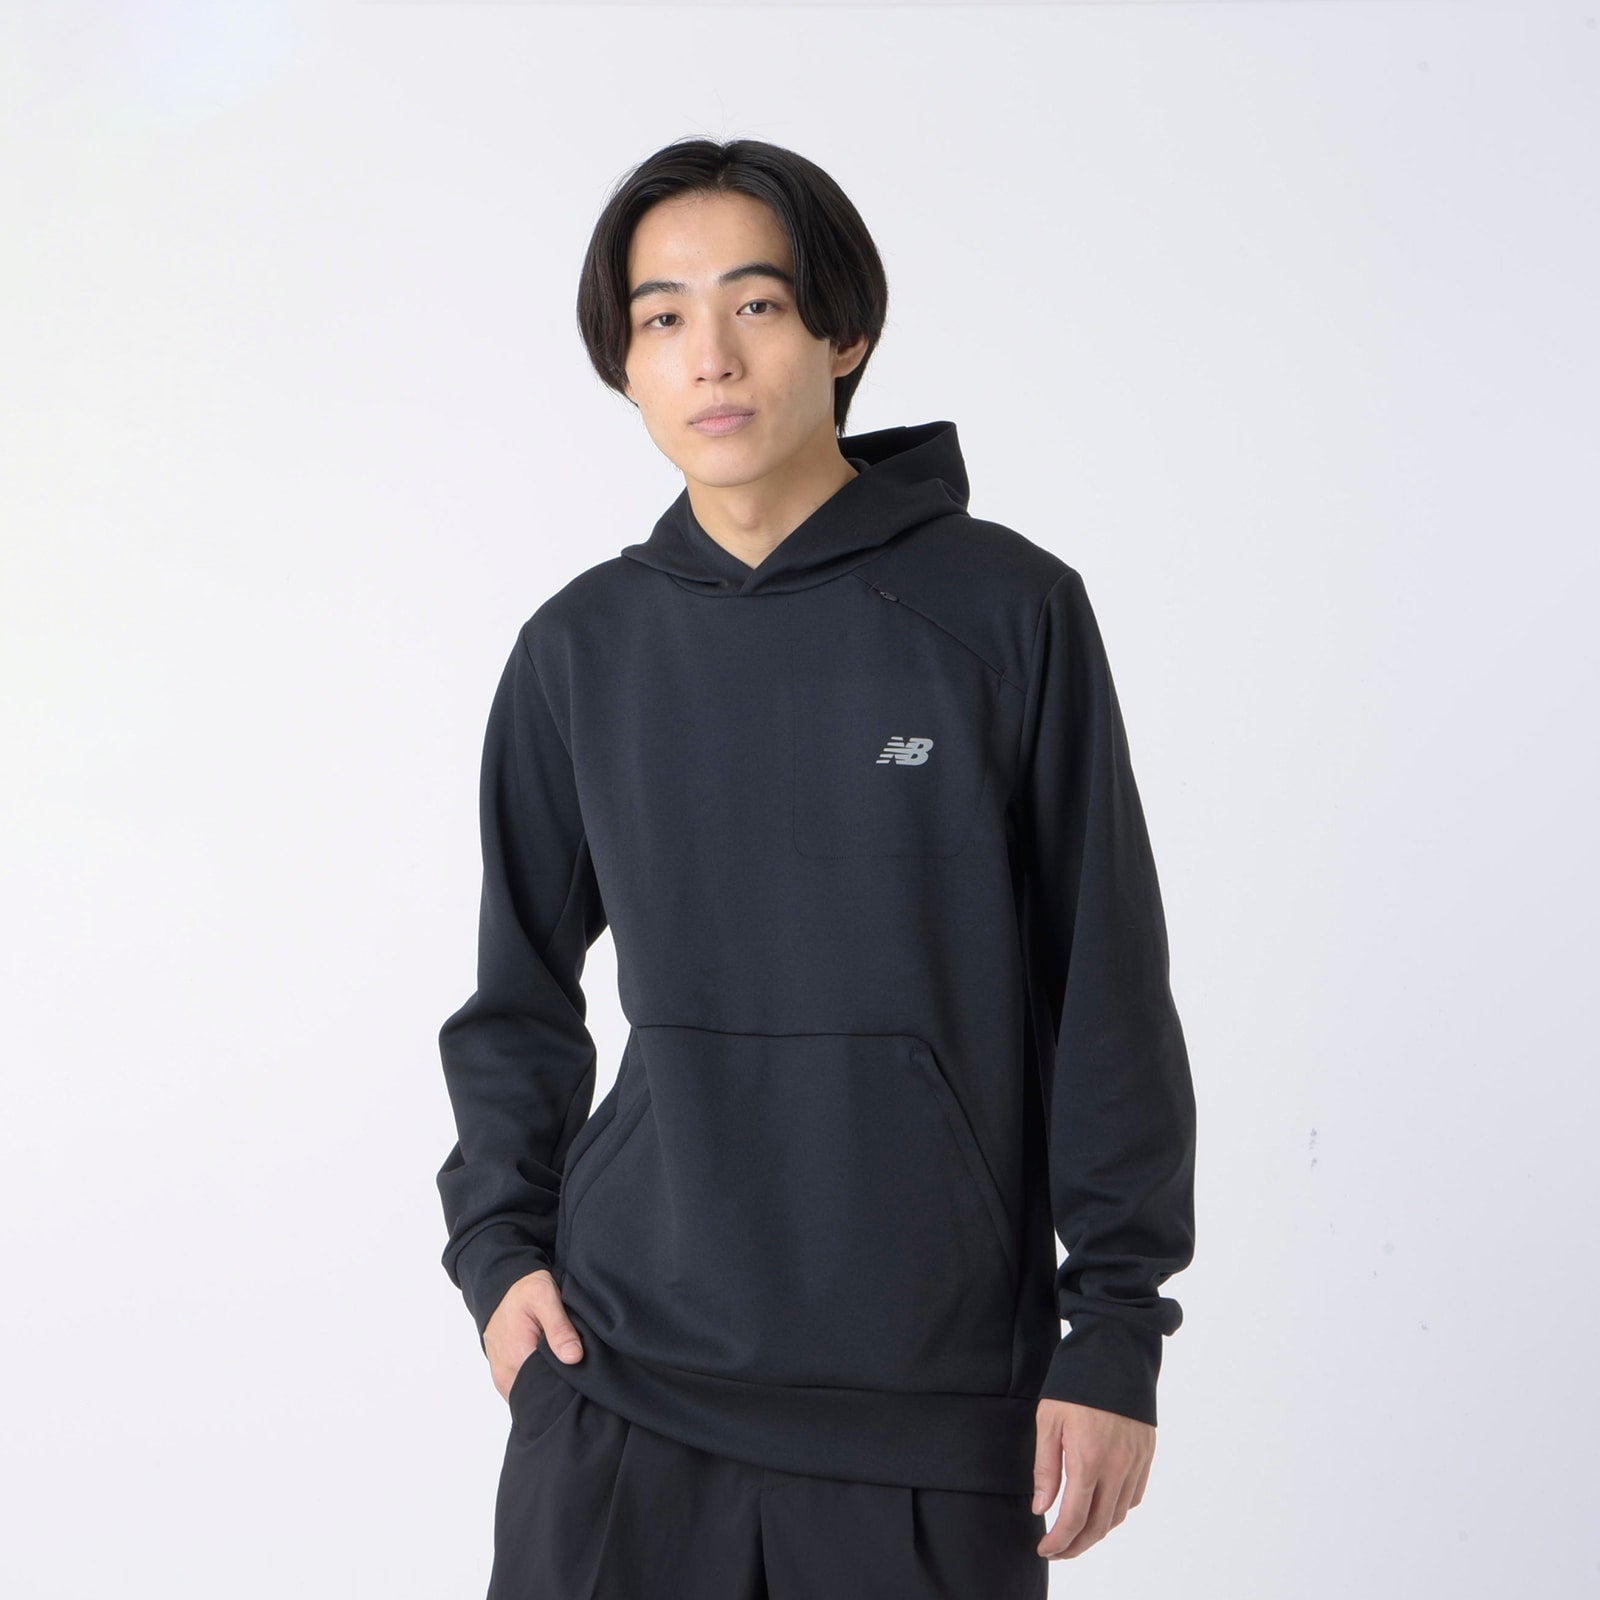 Tech knit pullover hoodie